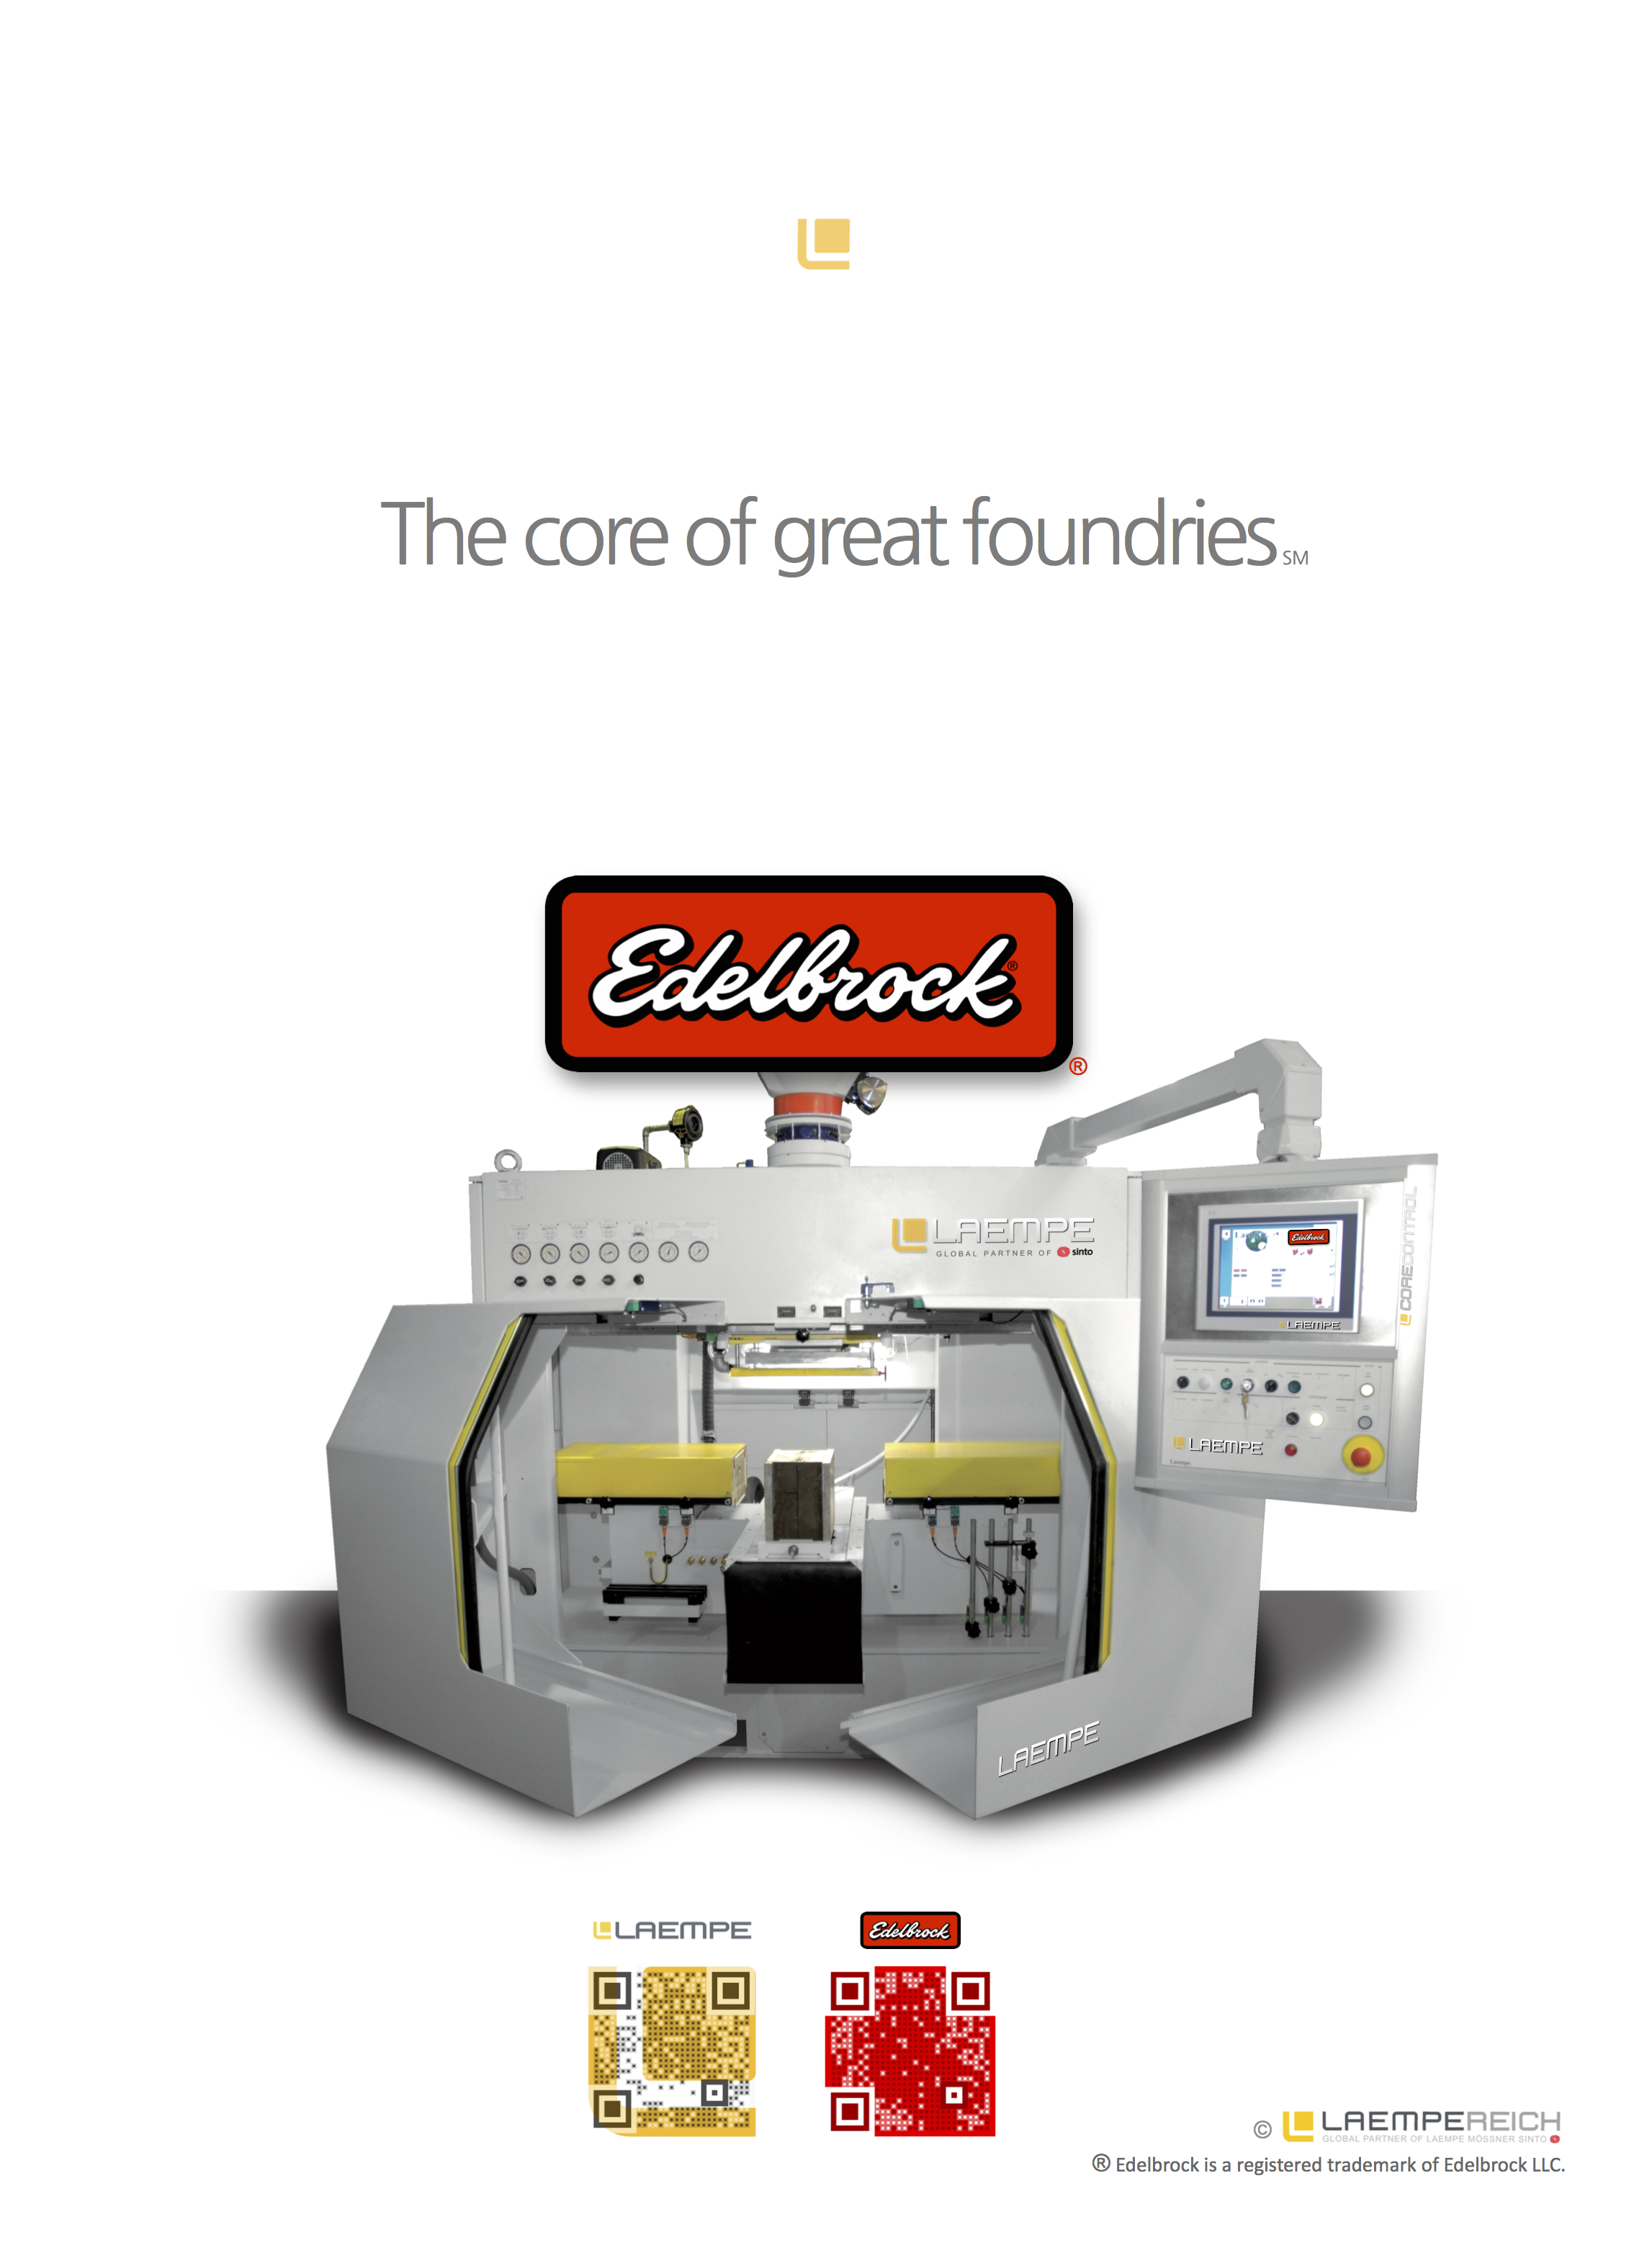 Edelbrock - At the Core of Great Foundries 2015 Red QR  26 October 15 - darker gray text - PCR.jpg